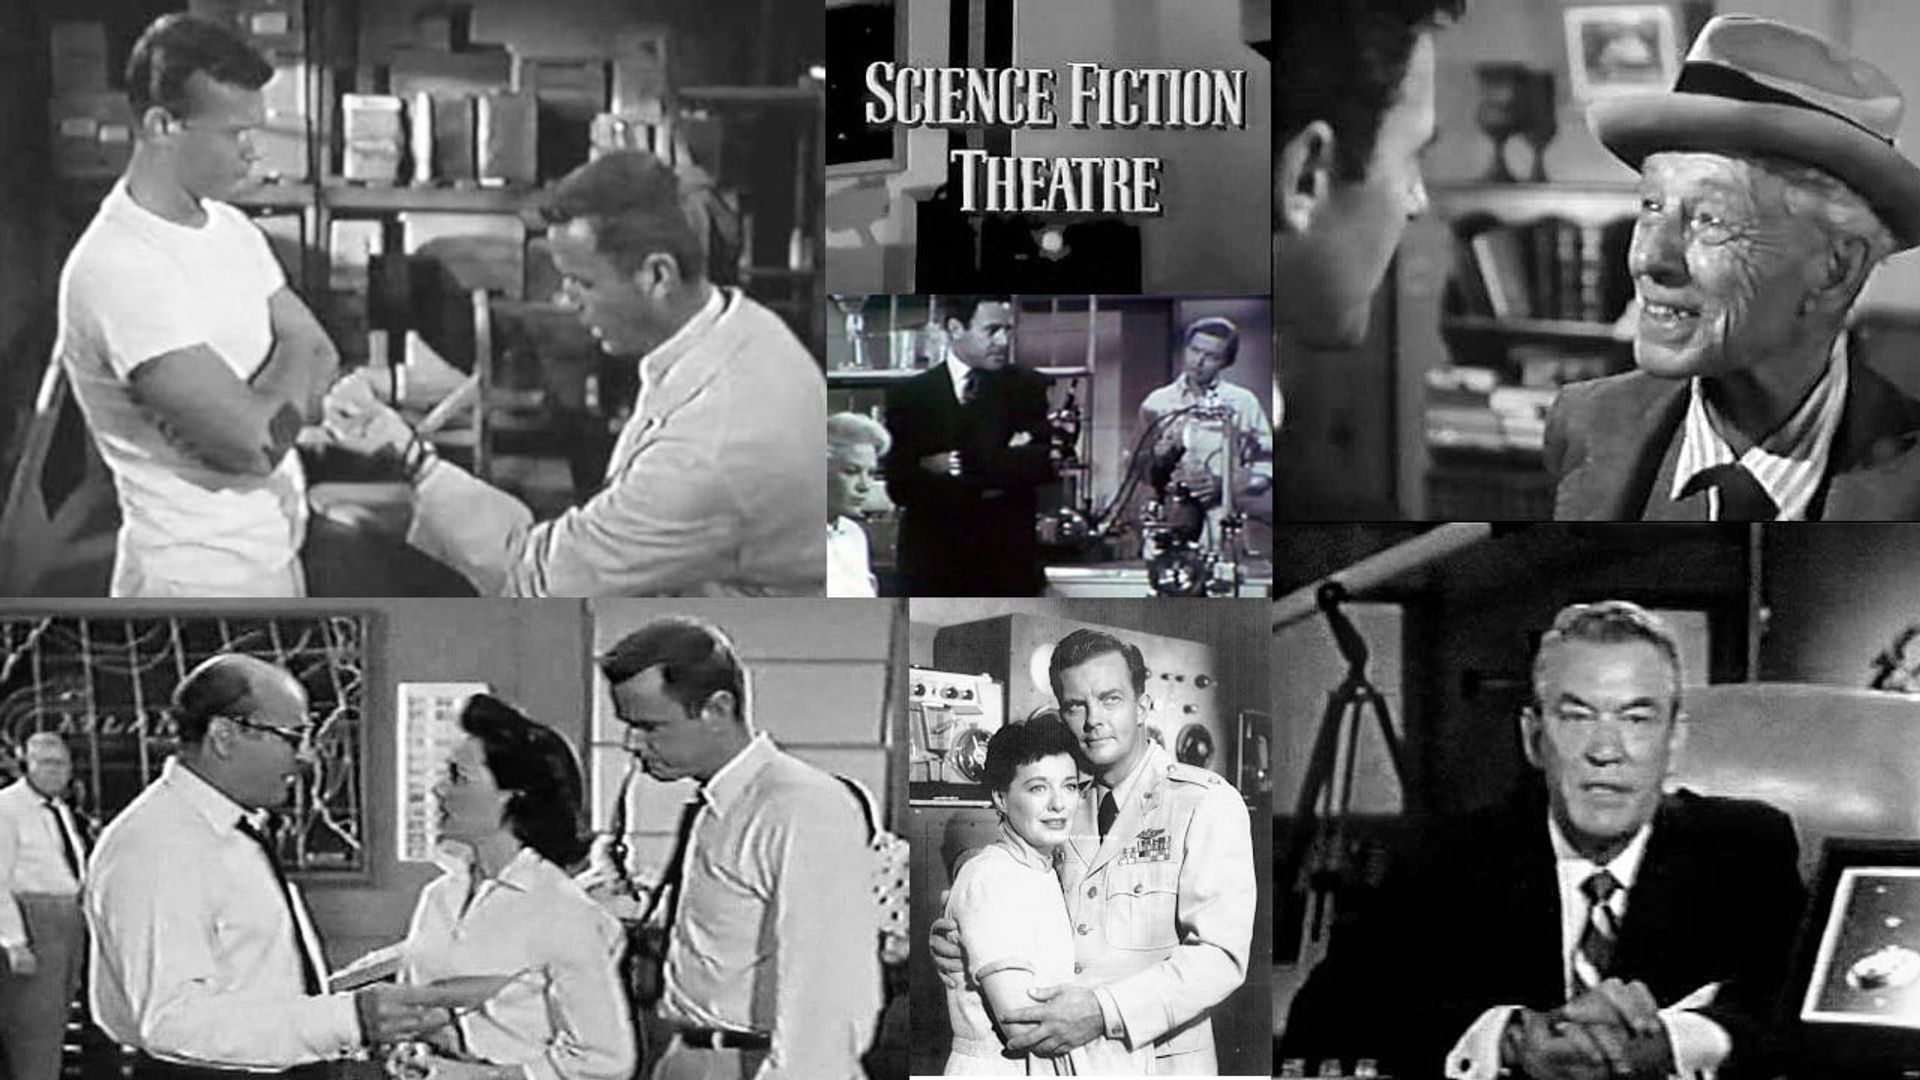 Science Fiction Theatre background